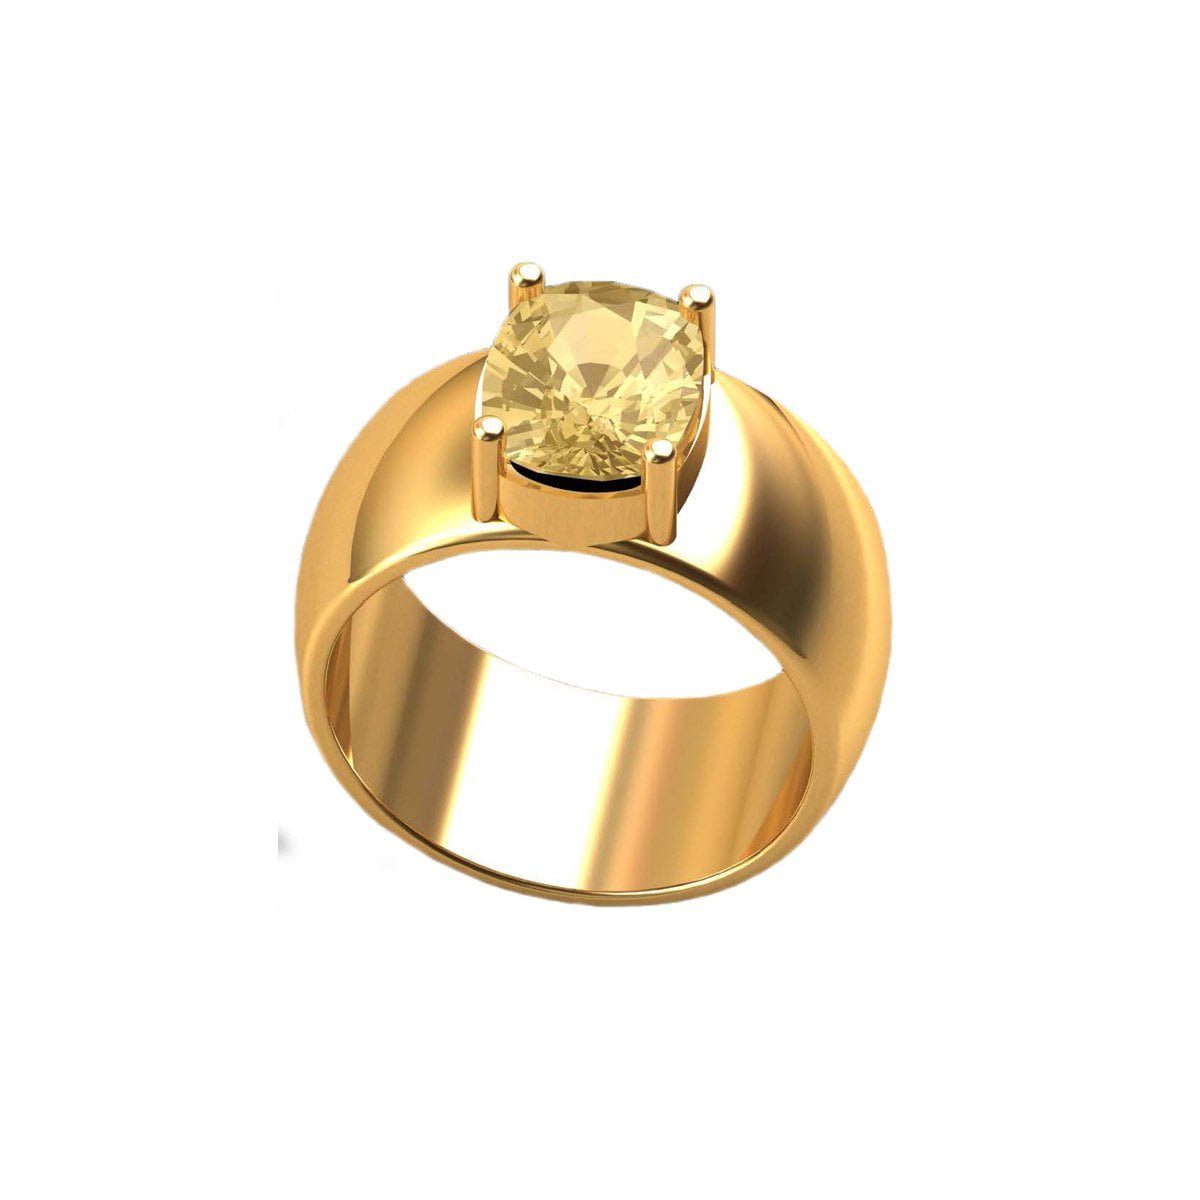 1 gram gold plated yellow stone etched design high-quality ring for – Soni  Fashion®